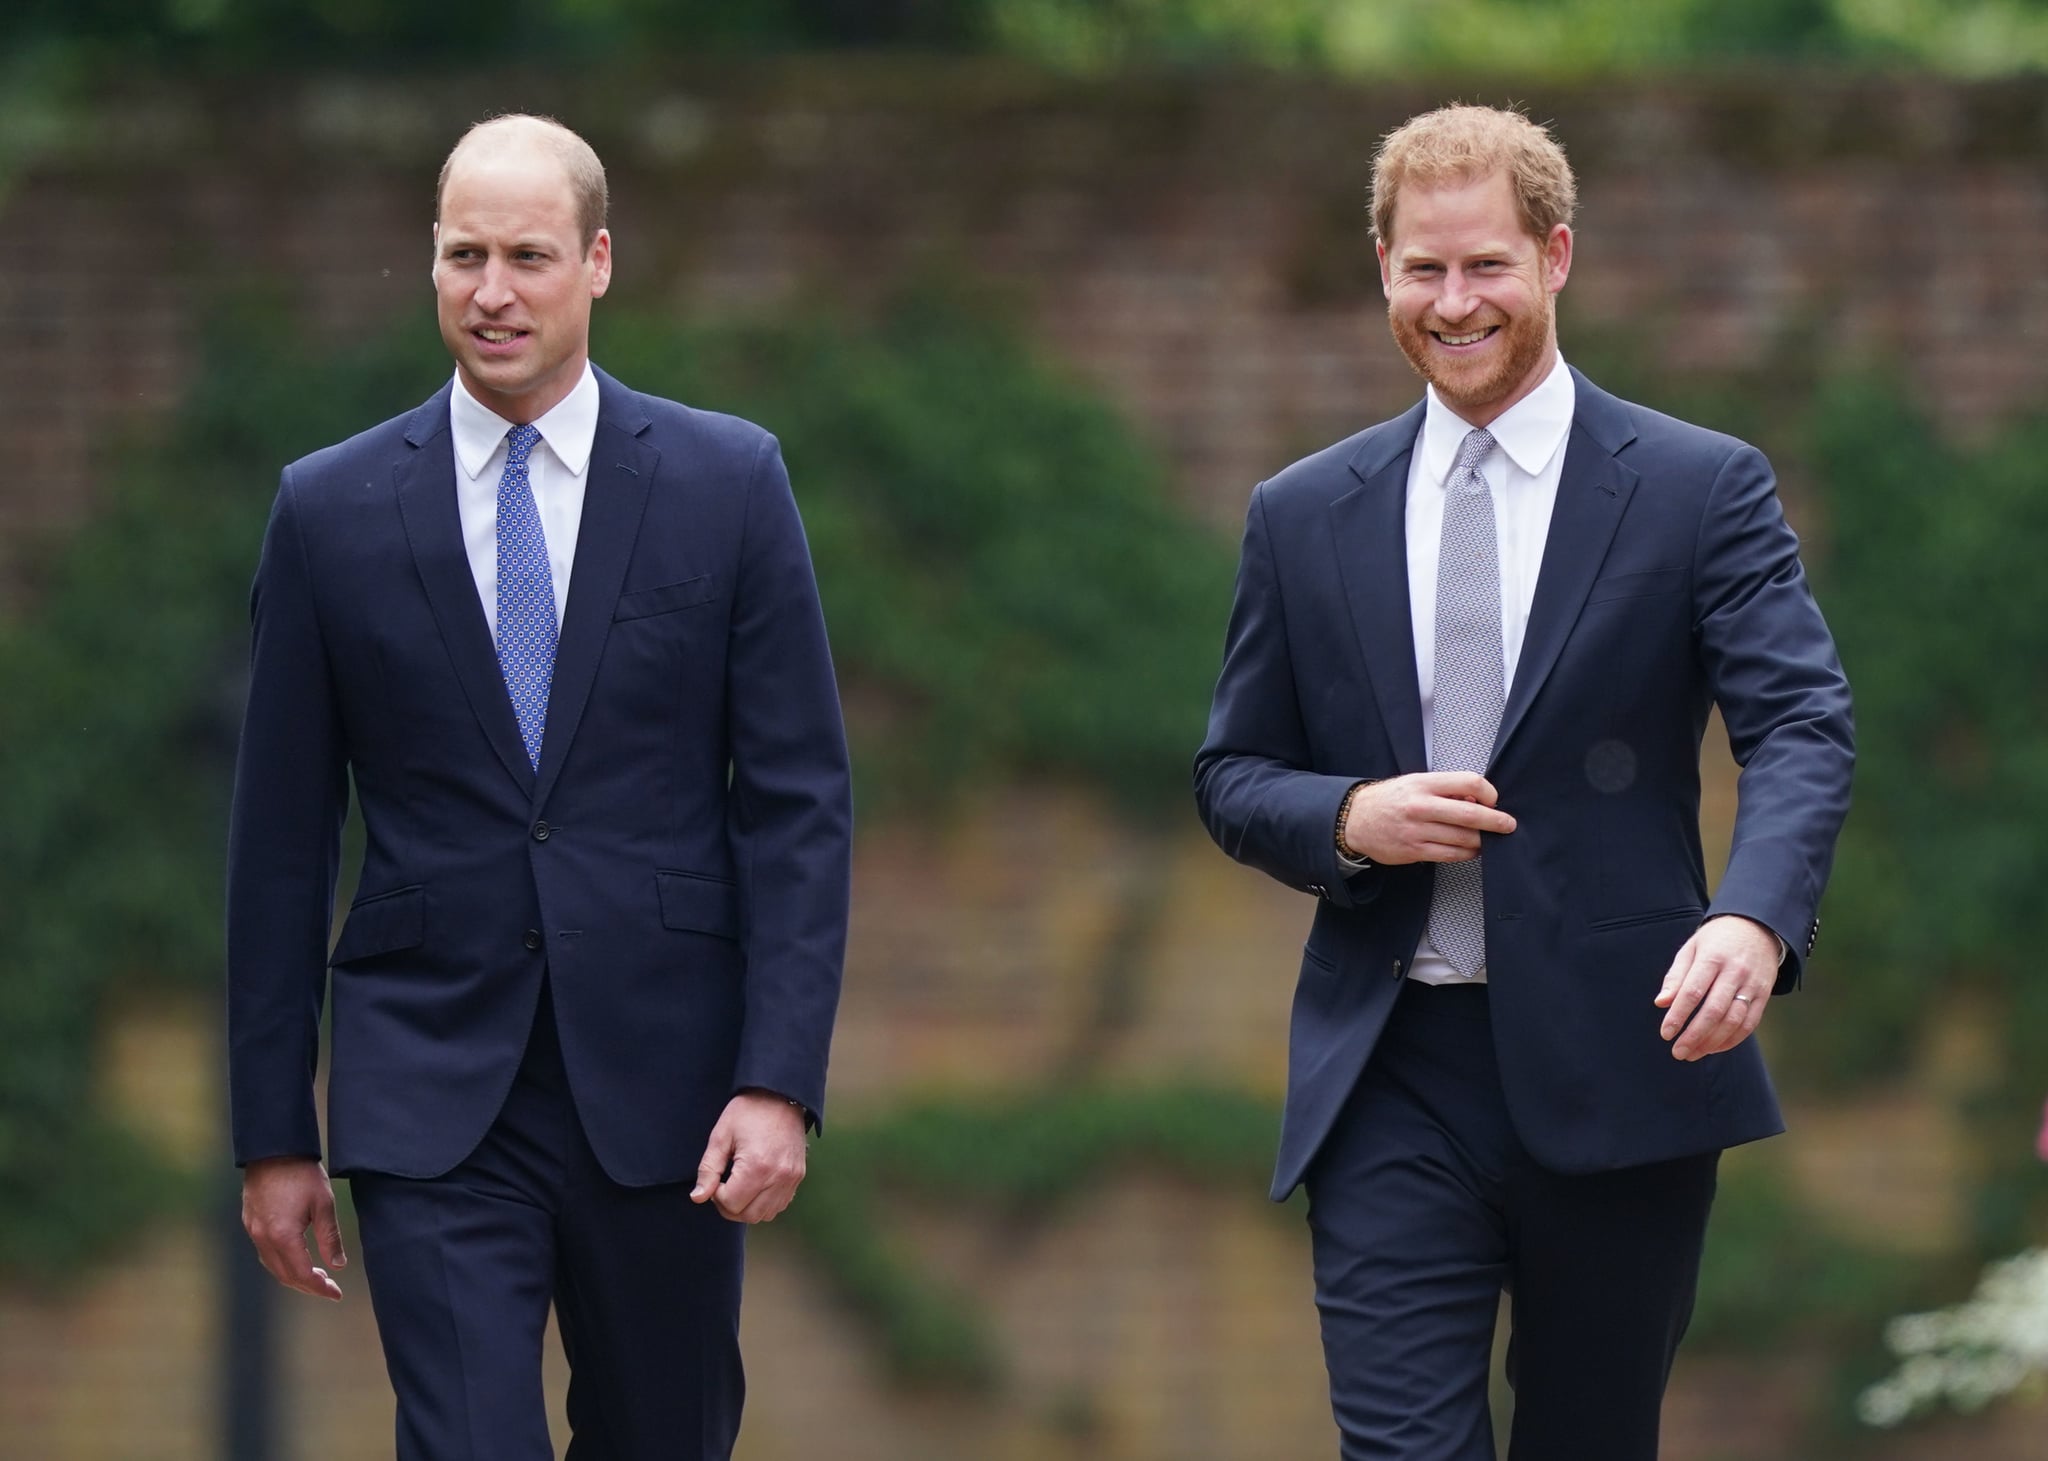 LONDON, ENGLAND - JULY 01: Prince William, Duke of Cambridge (left) and Prince Harry, Duke of Sussex arrive for the unveiling of a statue they commissioned of their mother Diana, Princess of Wales, in the Sunken Garden at Kensington Palace, on what would have been her 60th birthday on July 1, 2021 in London, England. Today would have been the 60th birthday of Princess Diana, who died in 1997. At a ceremony here today, her sons Prince William and Prince Harry, the Duke of Cambridge and the Duke of Sussex respectively, will unveil a statue in her memory. (Photo by Yui Mok - WPA Pool/Getty Images)